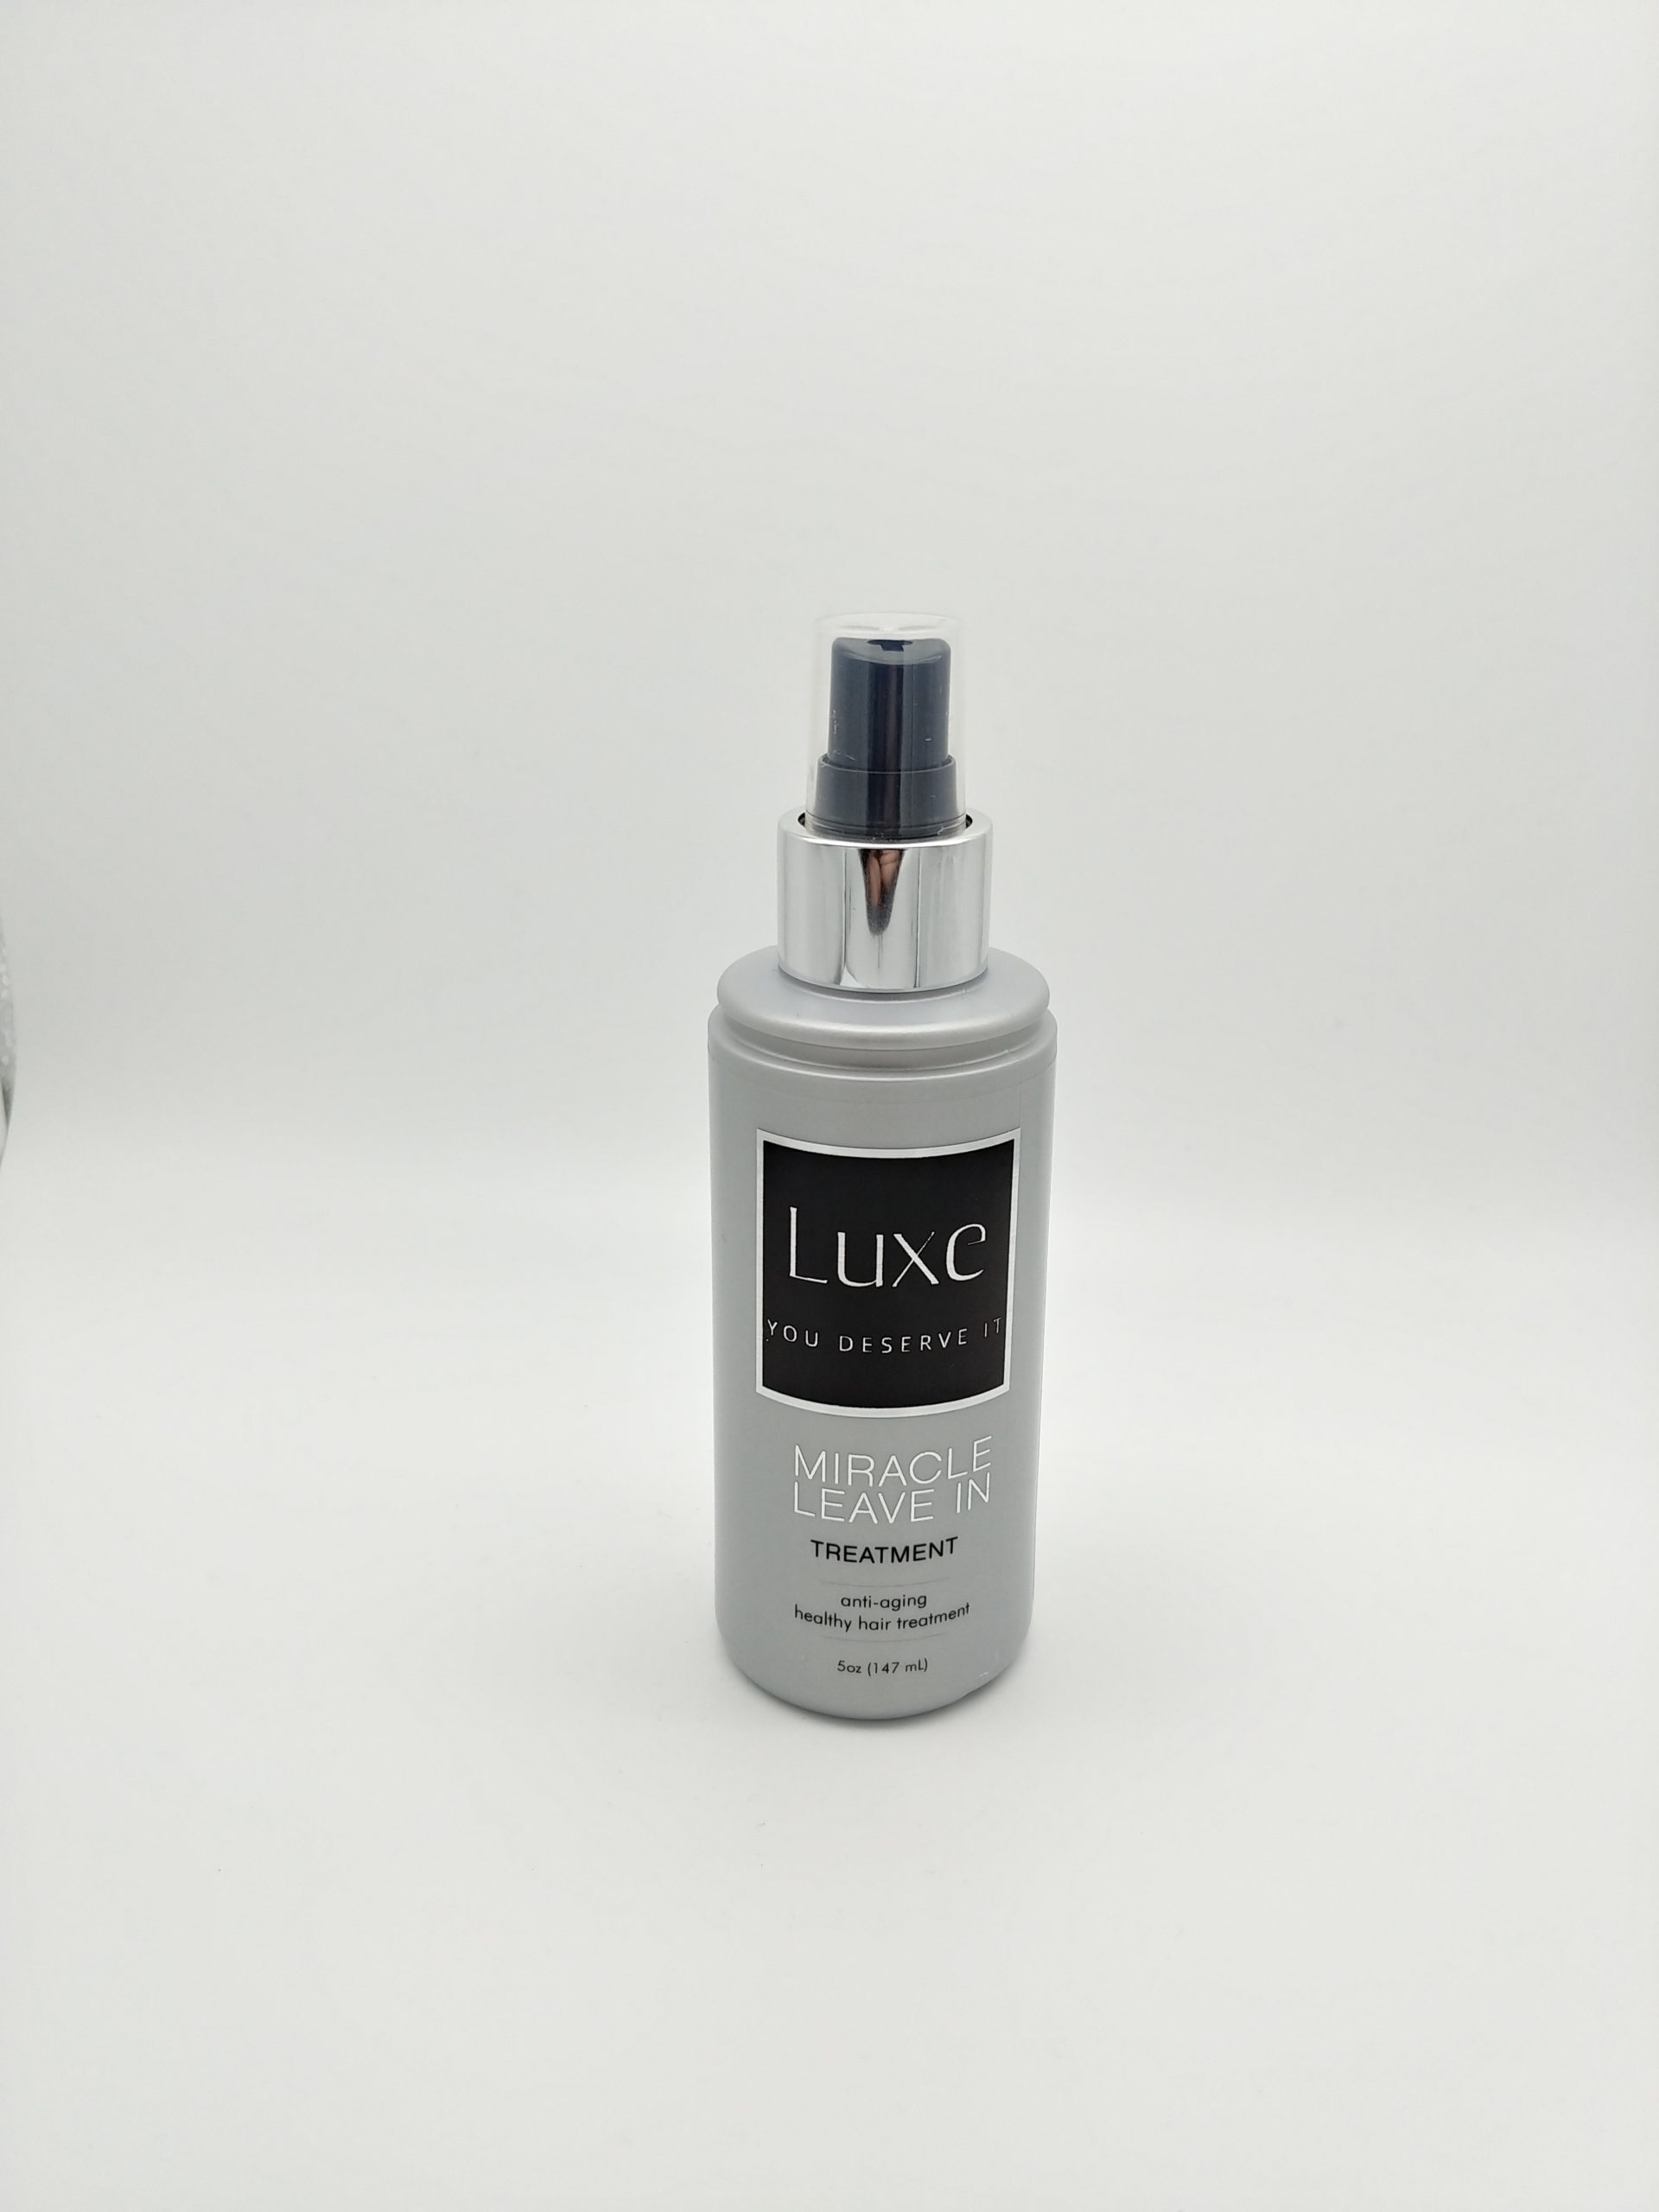 Luxe Miracle Leave-In Treatment